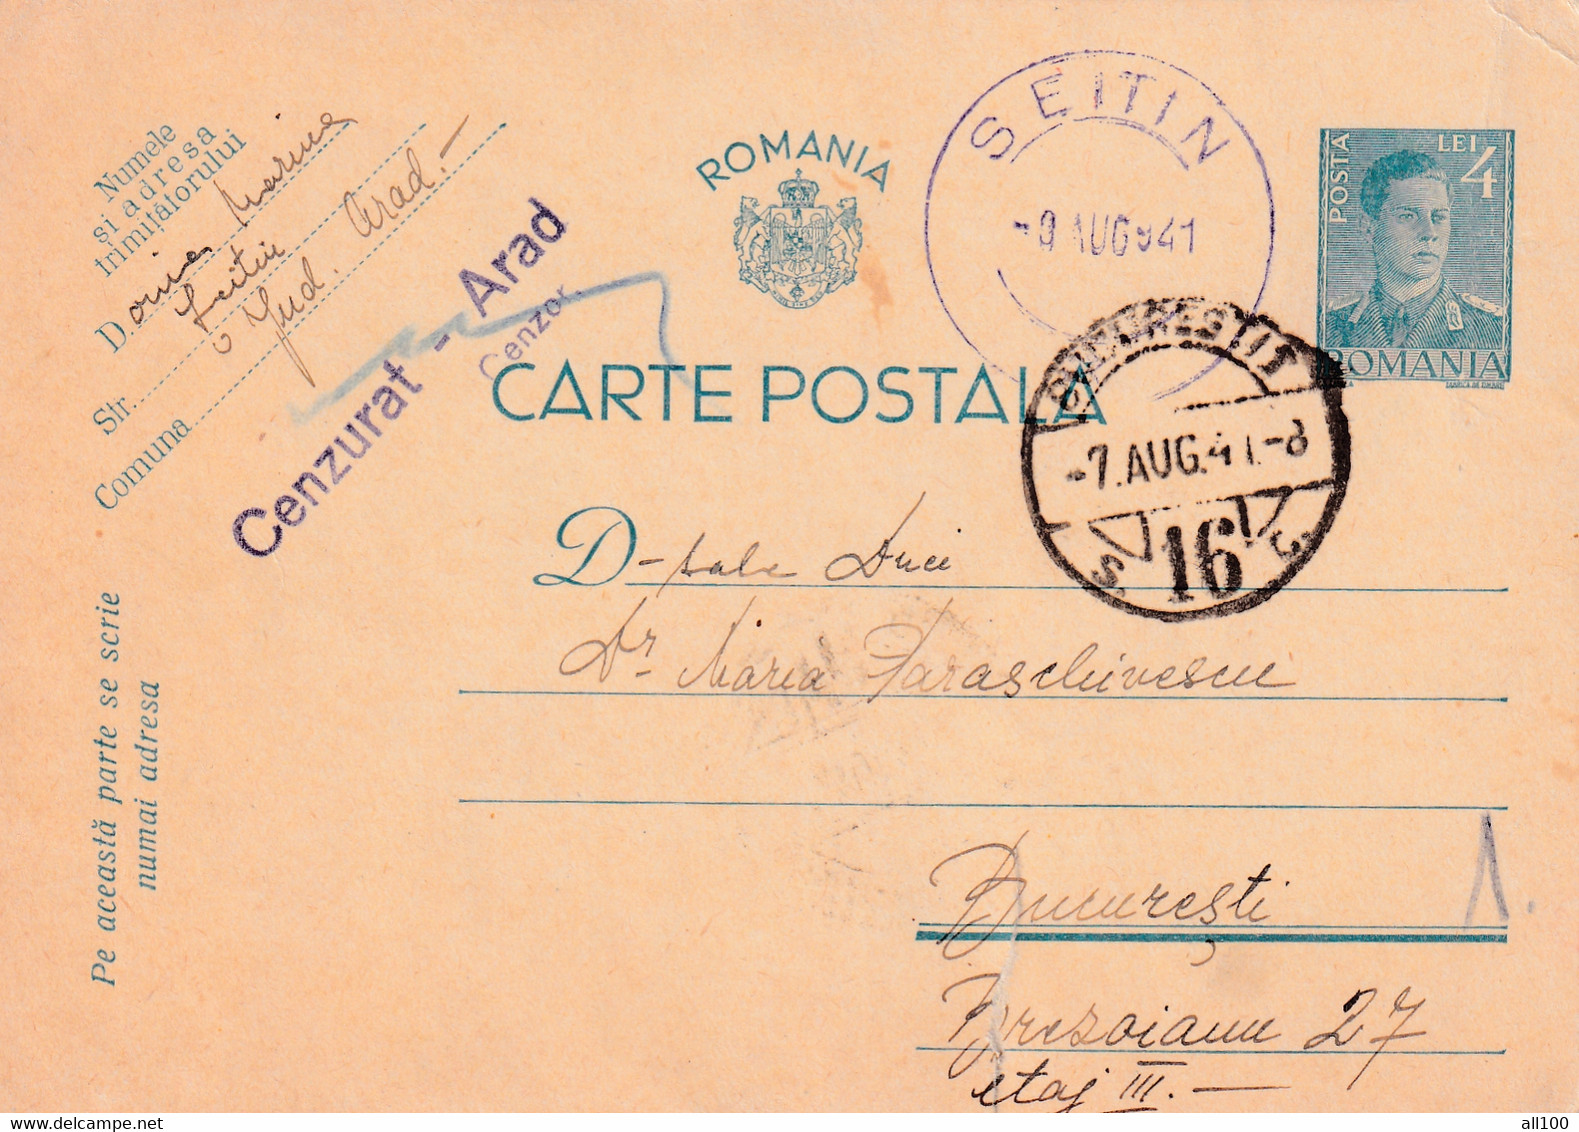 A16413 - MILITARY LETTER CENZURAT CENZORED ARAD SEITIN  KING MICHAEL 4 Lei  POSTAL STATIONERY 1941 - World War 2 Letters